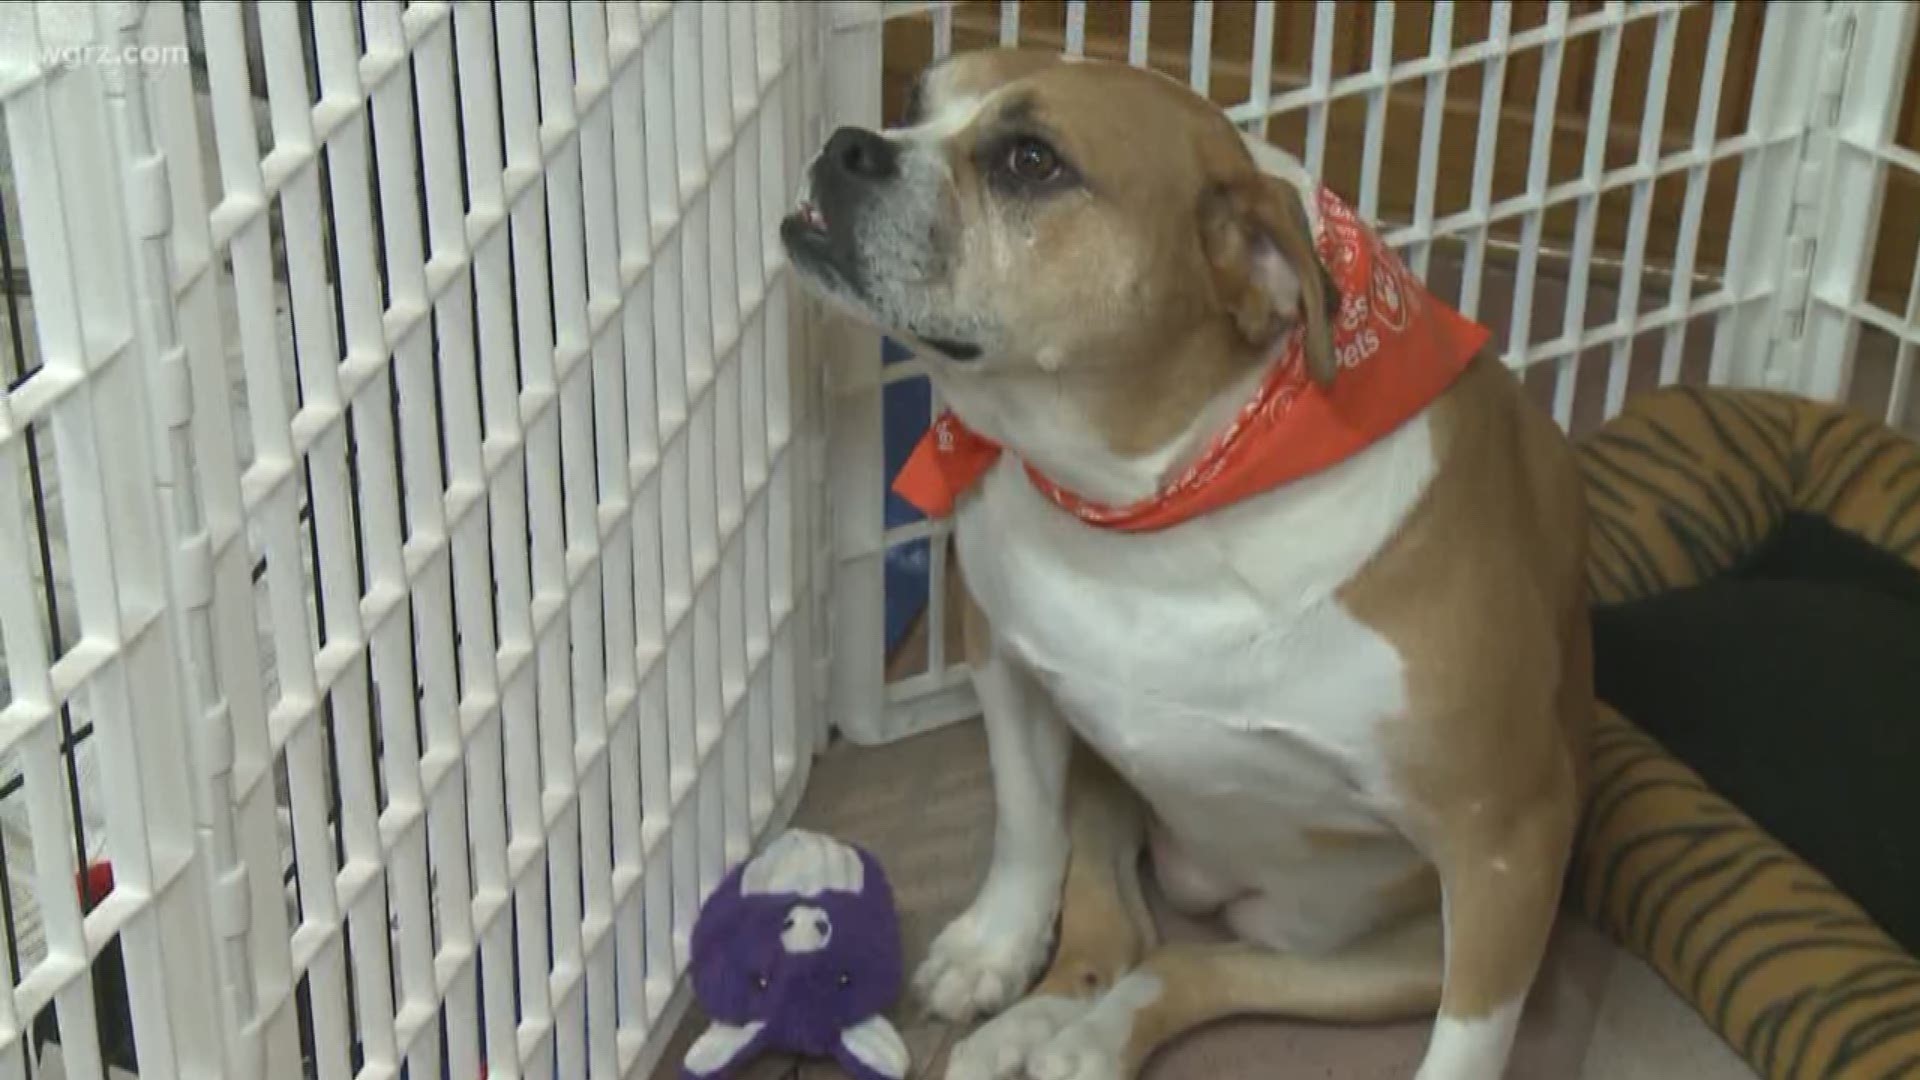 Event held to help adopt pets in need of a home.